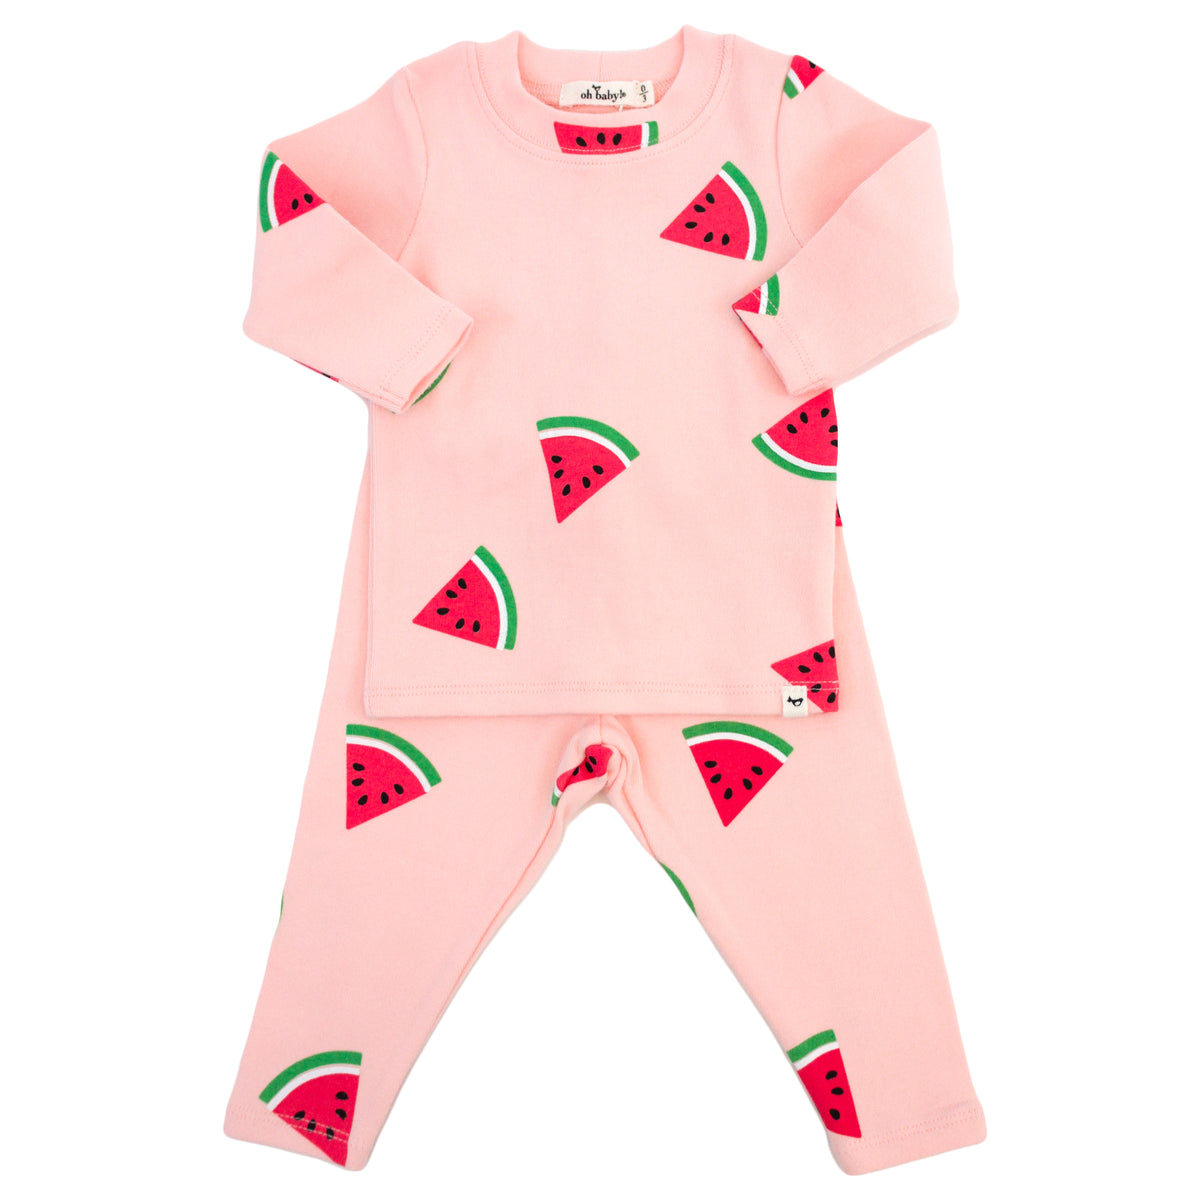 oh baby! Two Piece Set - Watermelon Print - Pale Pink